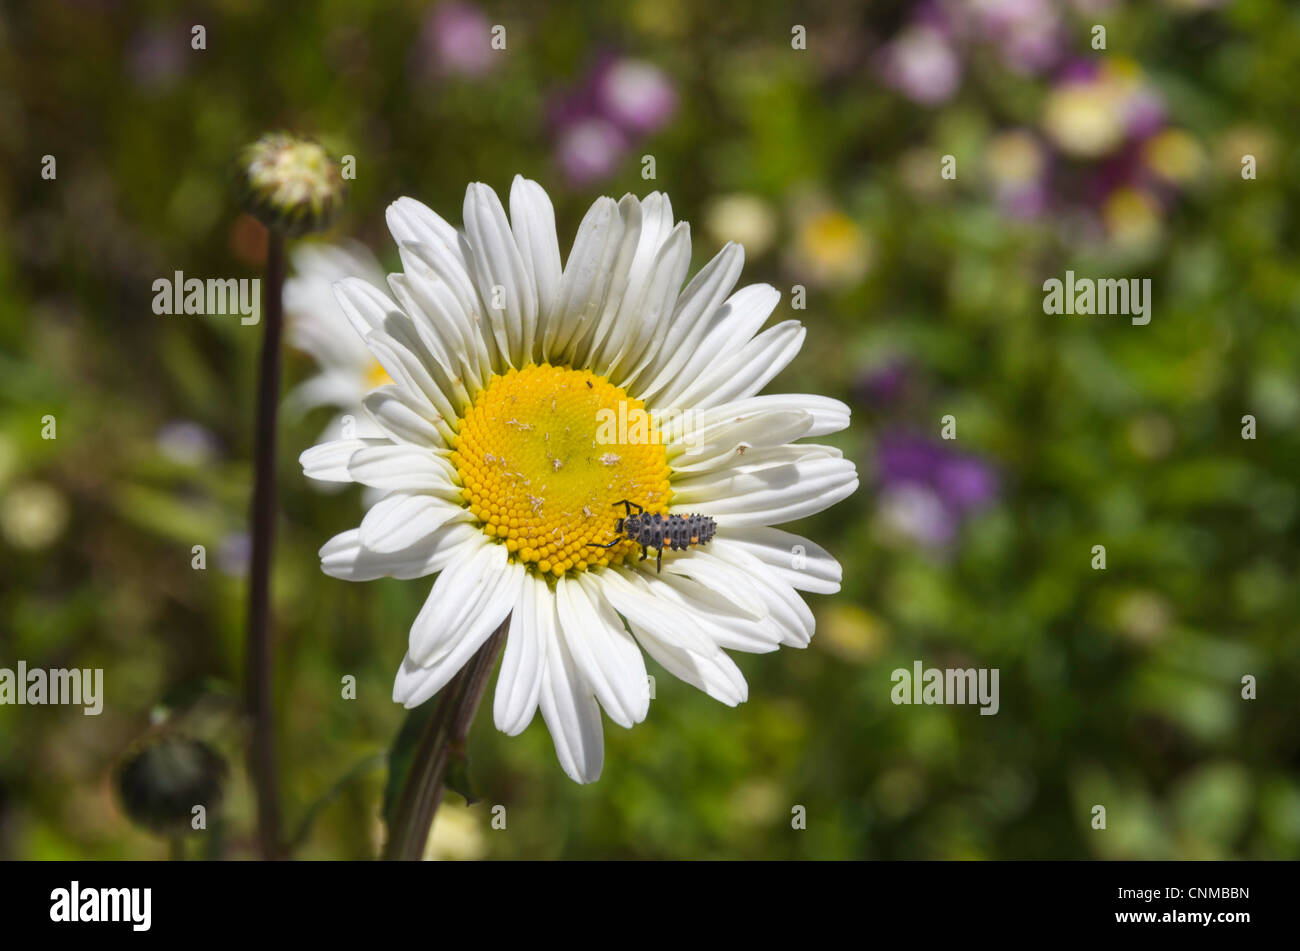 Beetle (Coccinellidae) on a white sun flower. Stock Photo